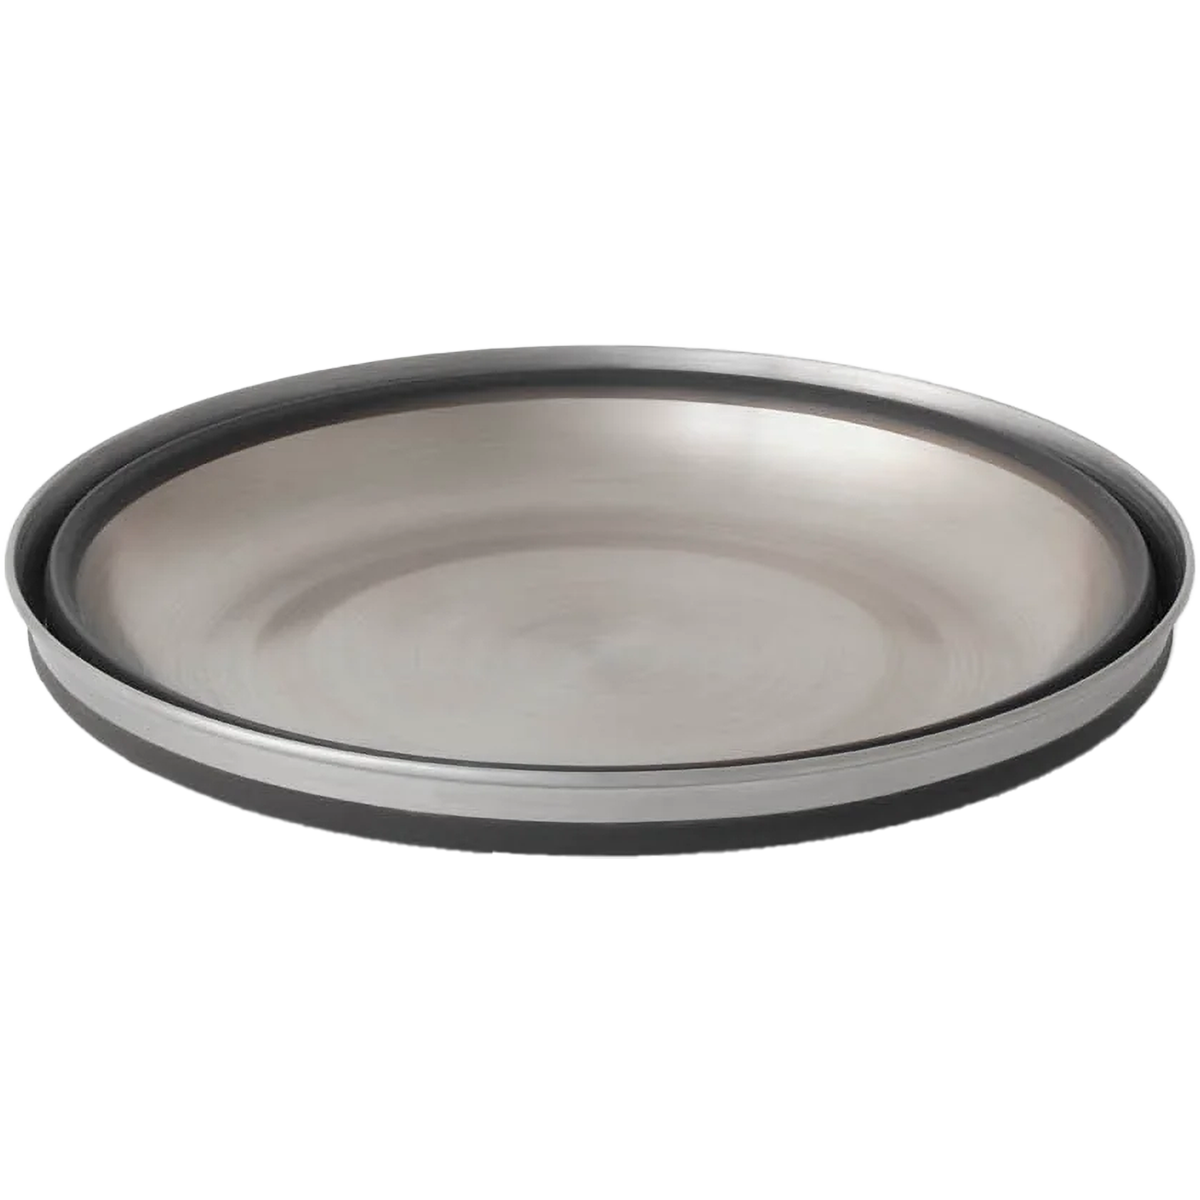 Detour Stainless Collapsible Bowl - Large alternate view